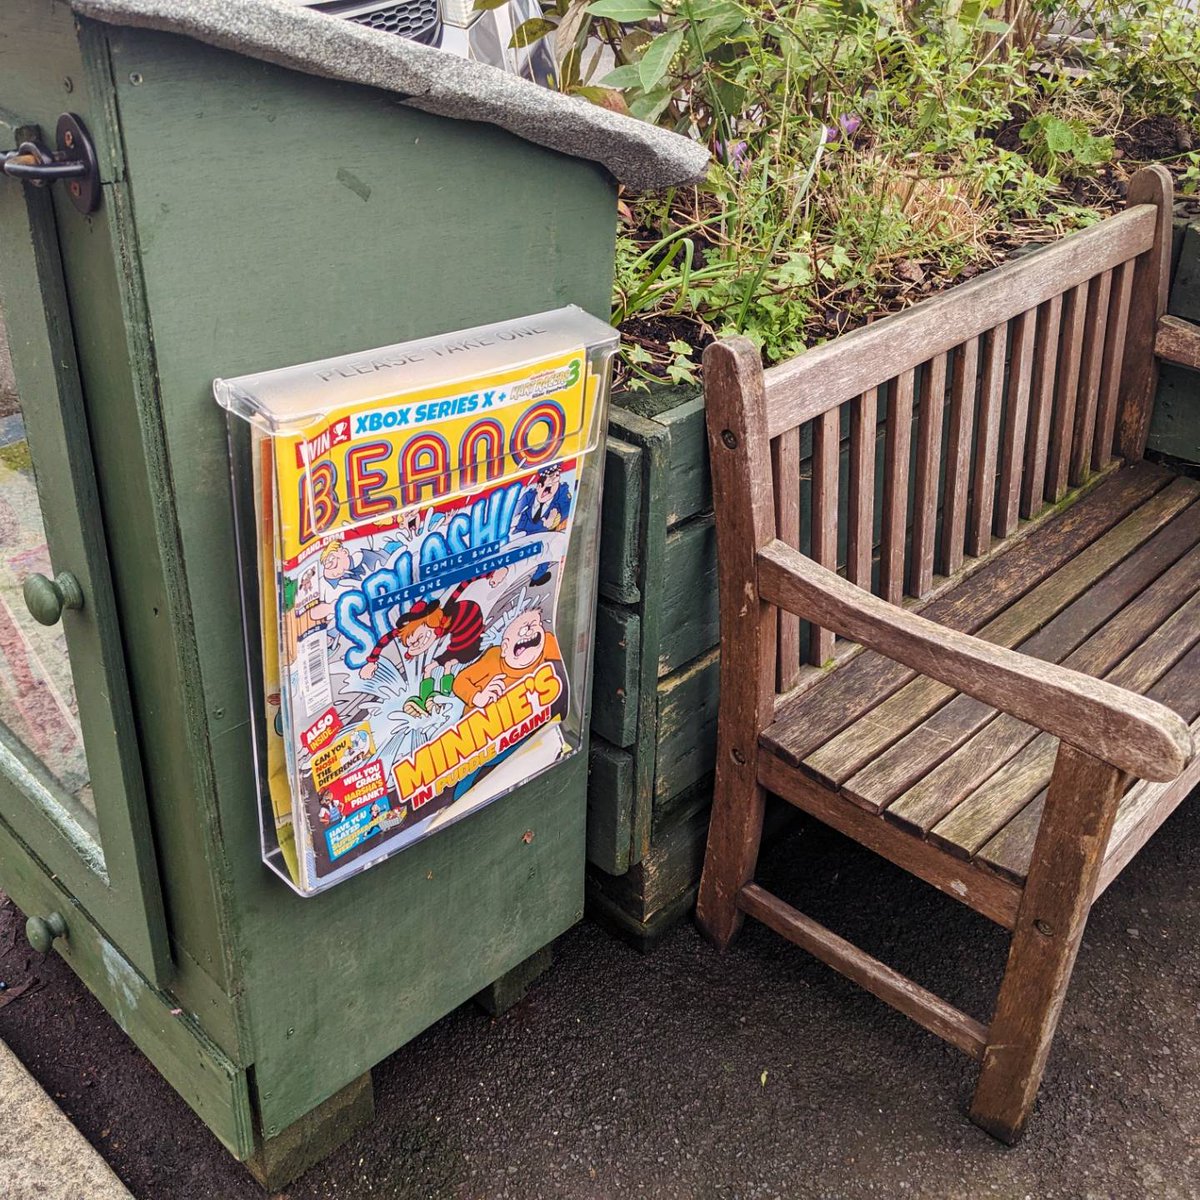 Comic Swap is in! It's loaded with Beano's to keep older children entertained and we'll keep it well stocked. Feel free to drop by and grab some free chuckles!

#parklets
#highamhill
#StoriesFromtheE17Parklet @AxtellCarolyn  @playingoutcic  @Labourstone